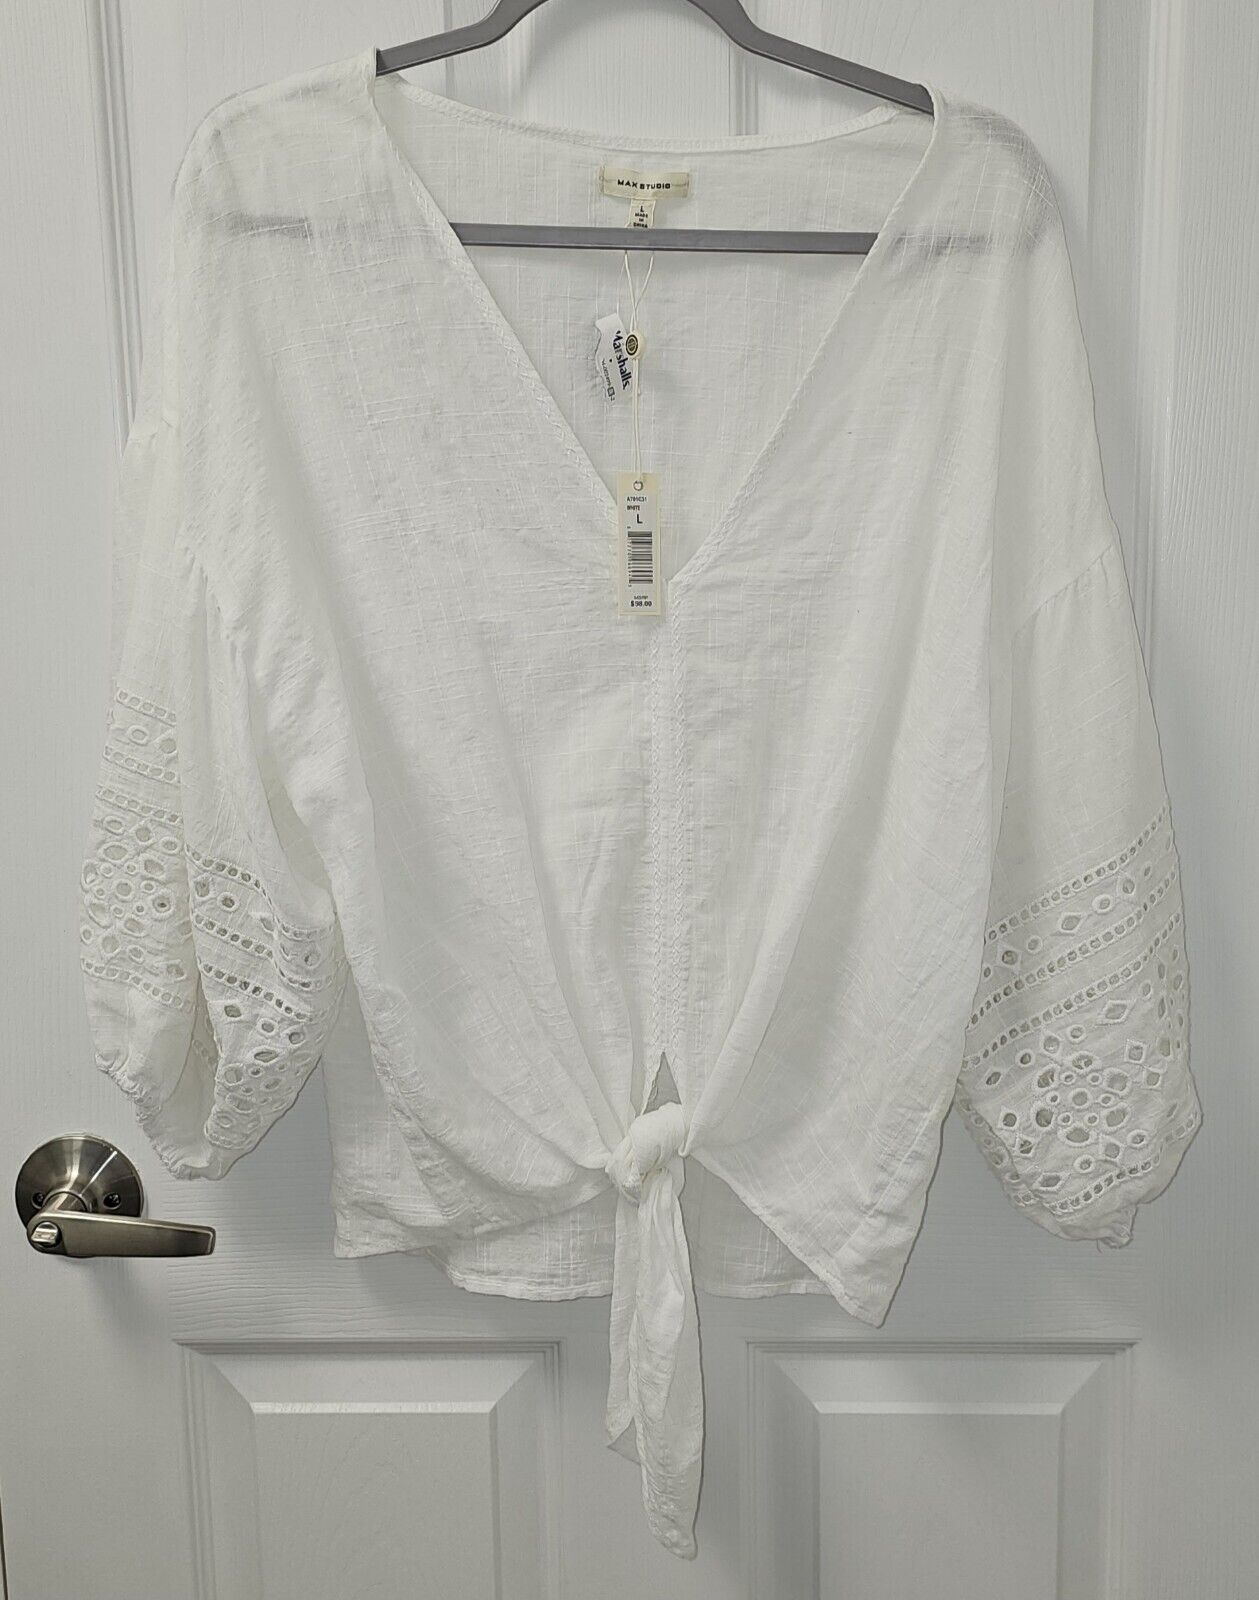 White Max Studio Top Blouse NWT New Peasant Lace Eyelet $98 Large L